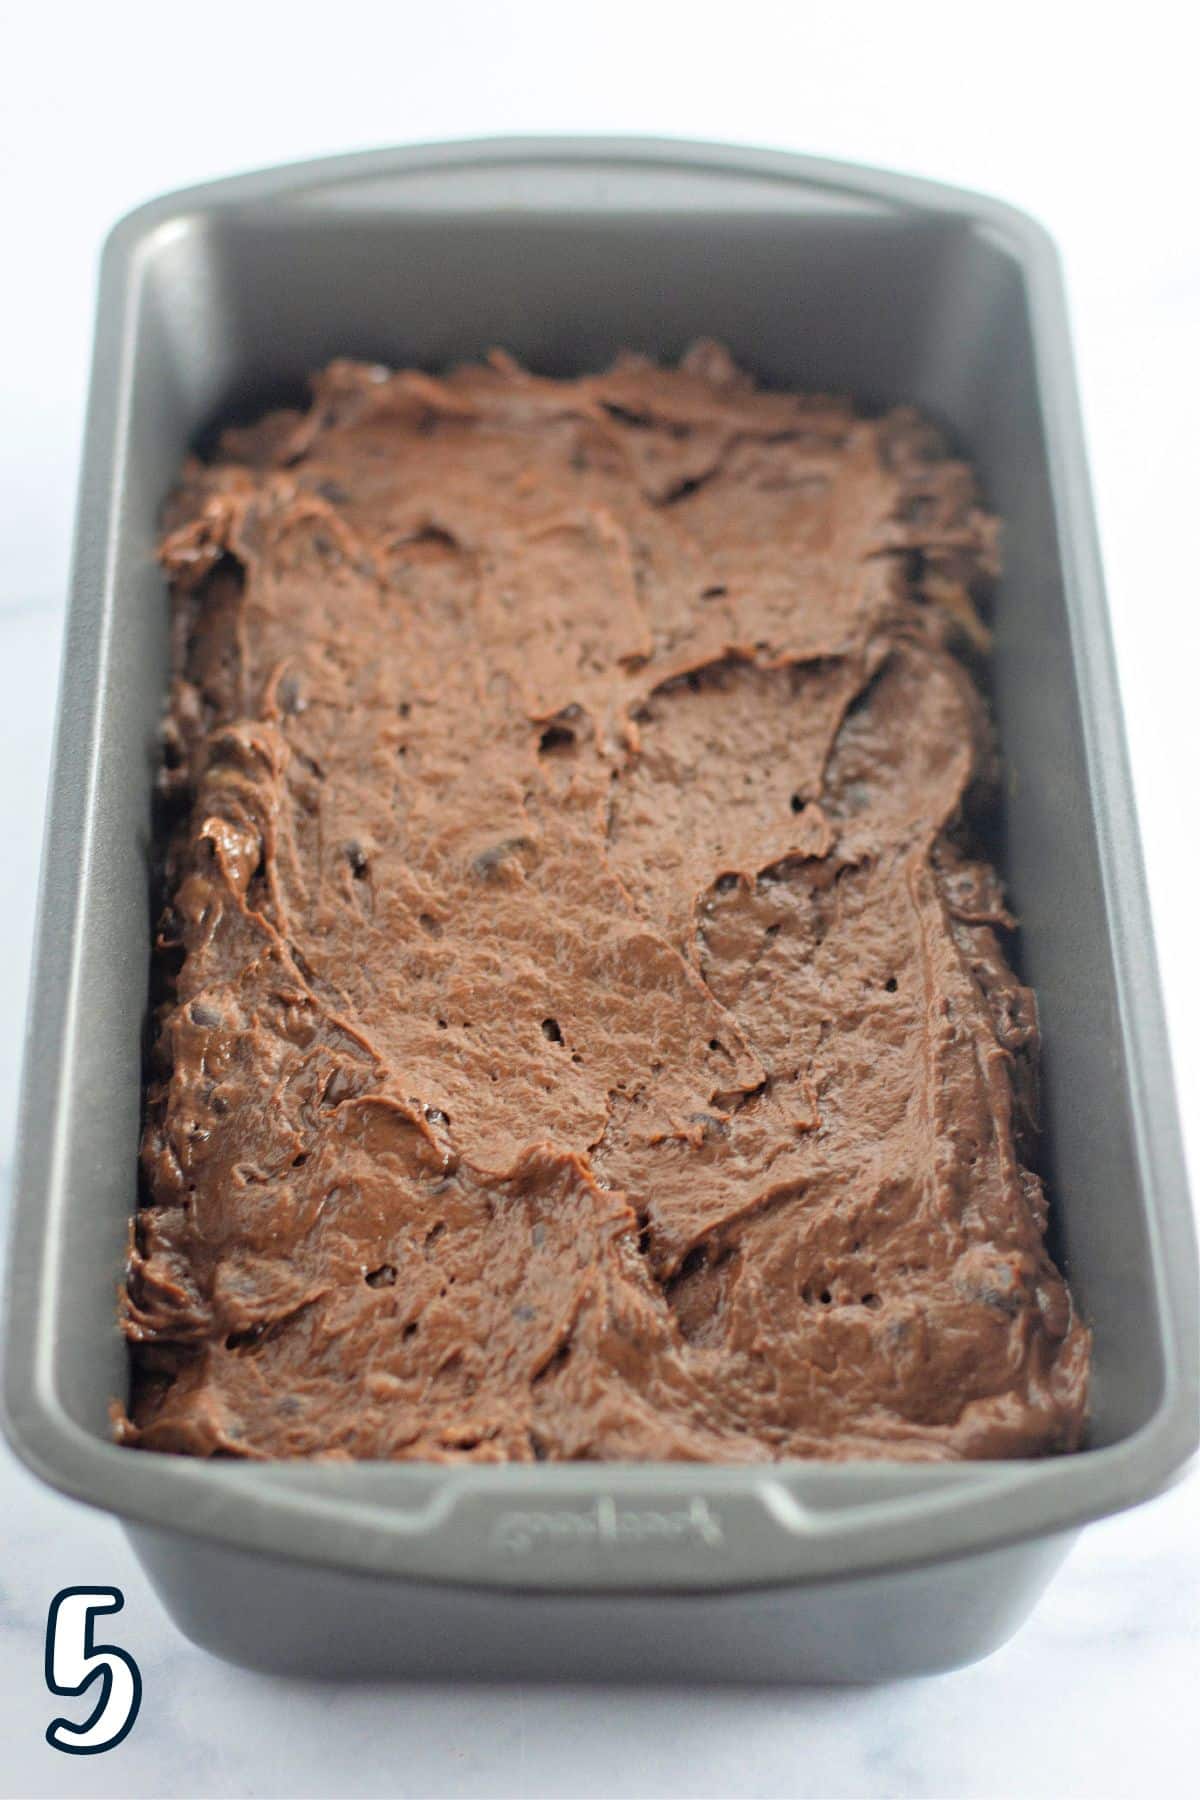 Chocolate banana bread batter in a loaf pan.